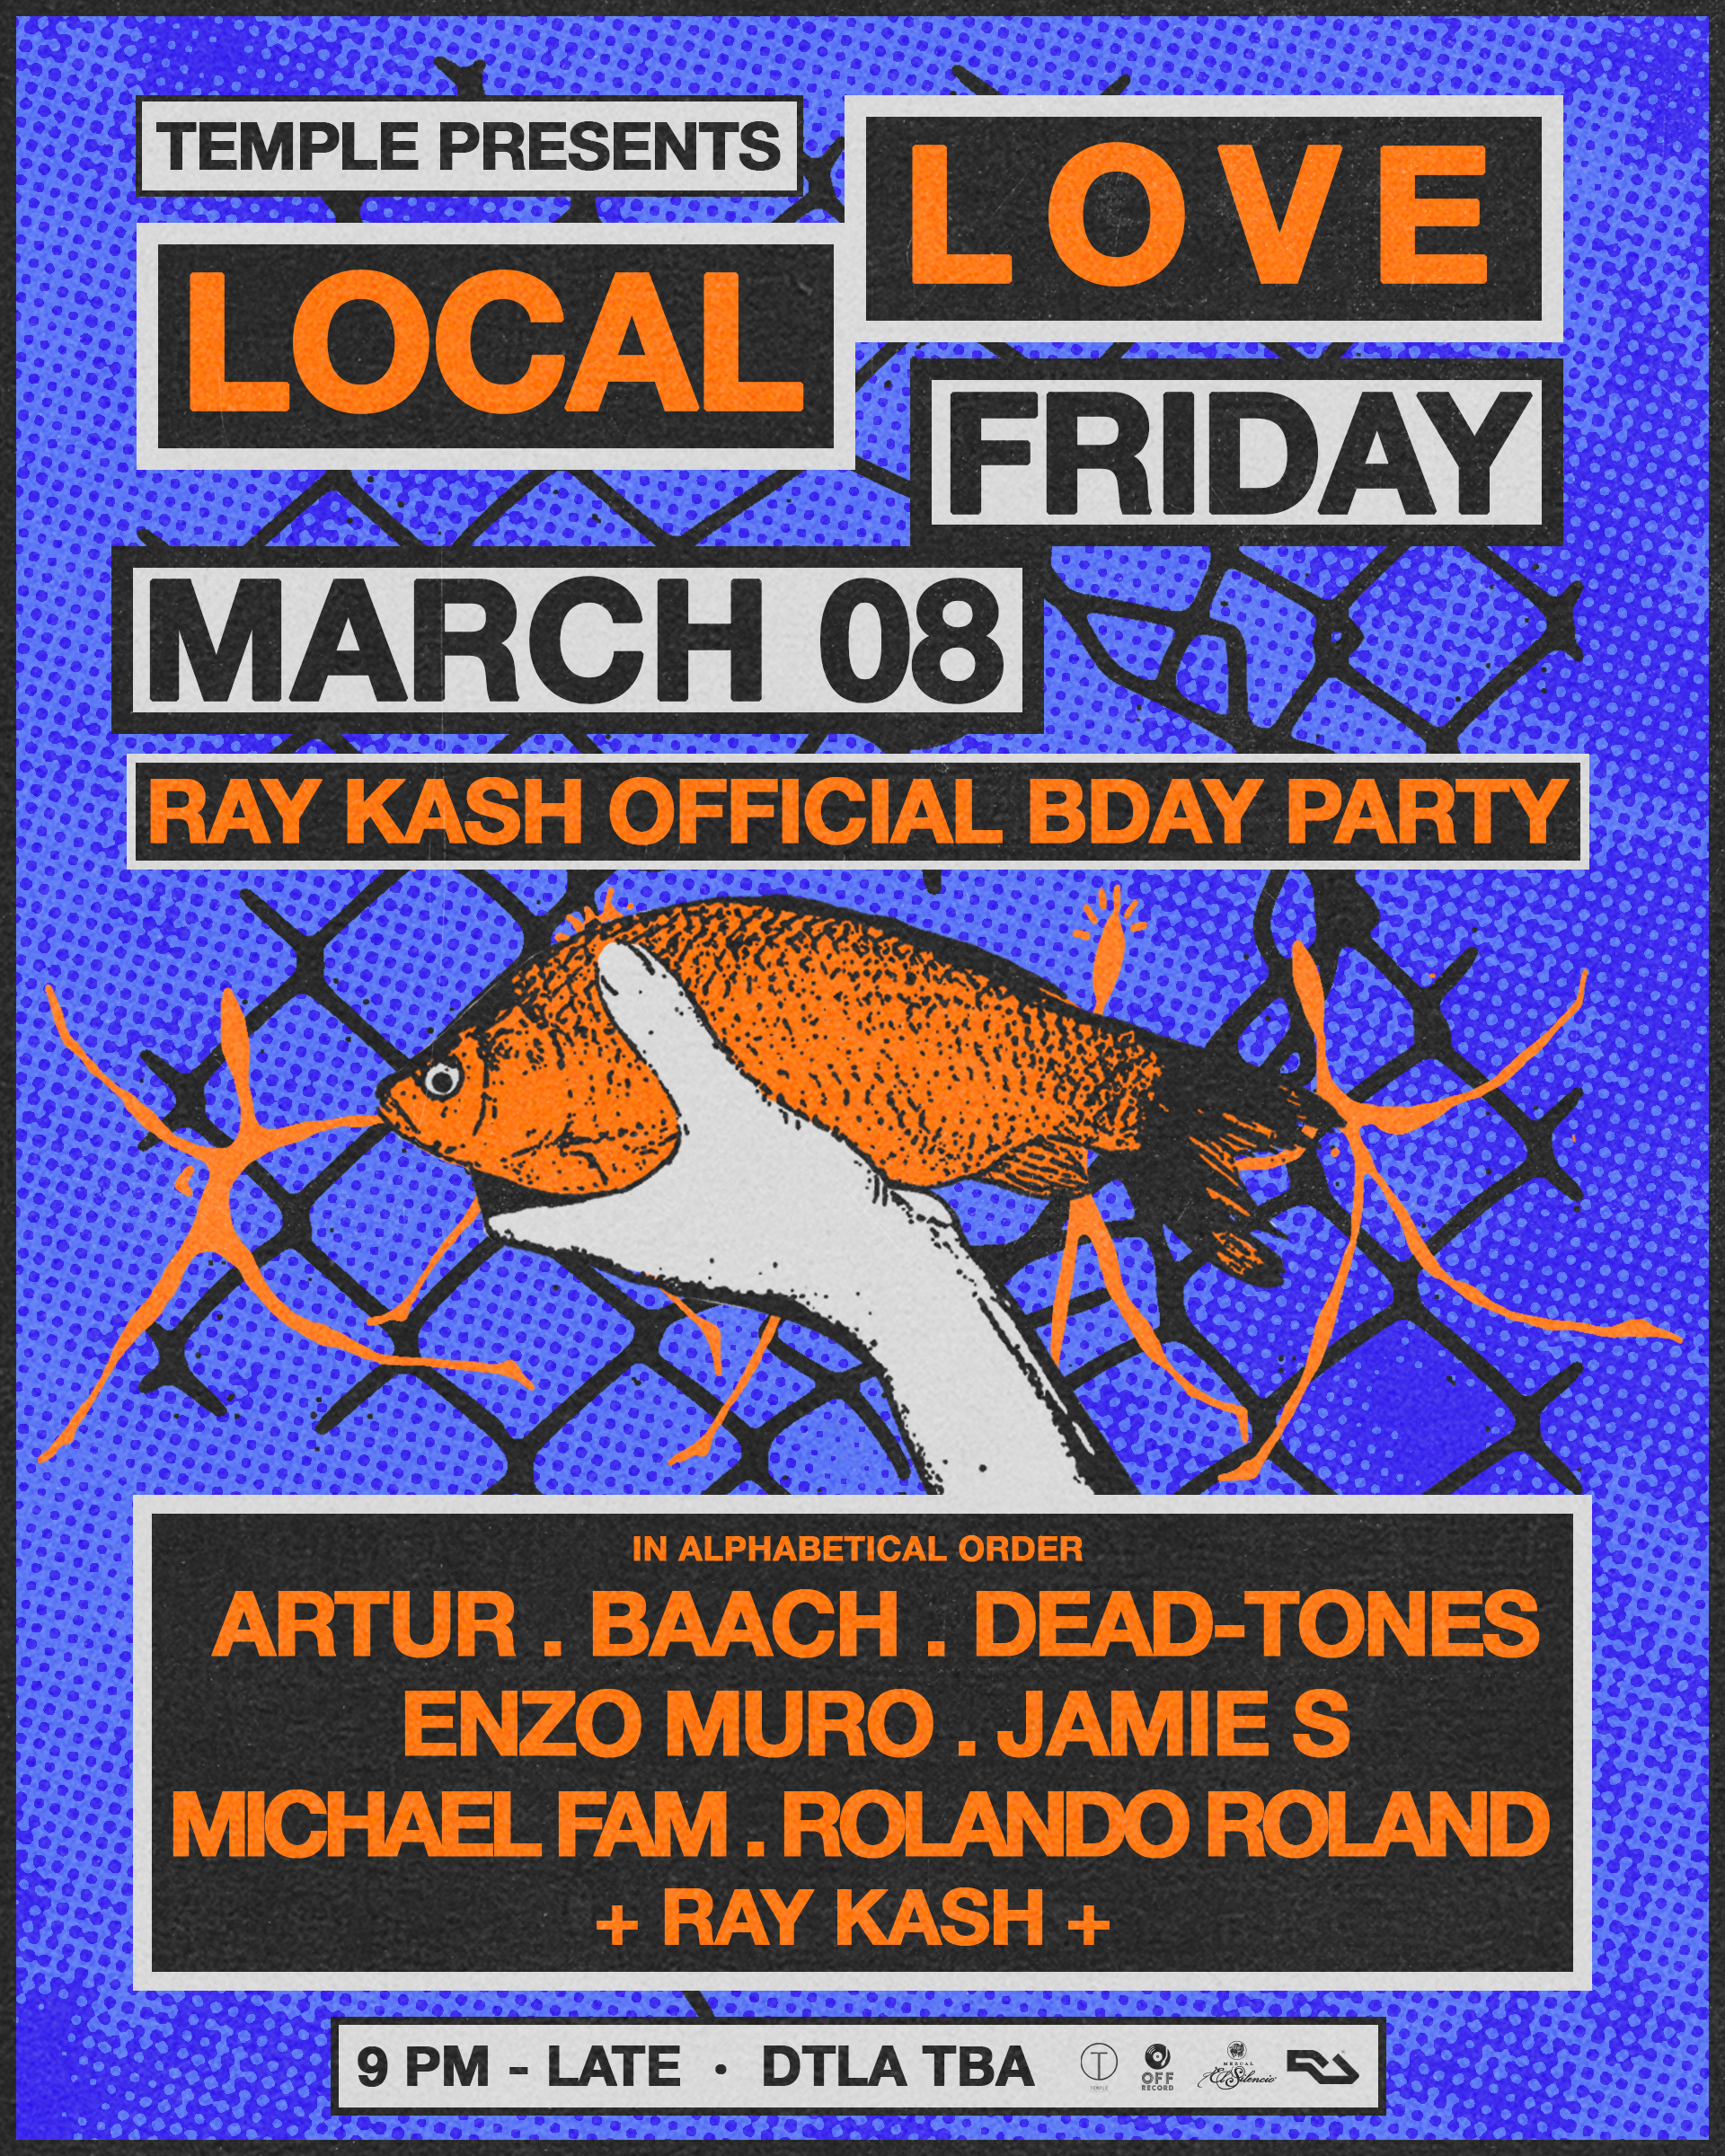 Temple presents: Local Love (Ray Kash Official Bday Party) - フライヤー裏